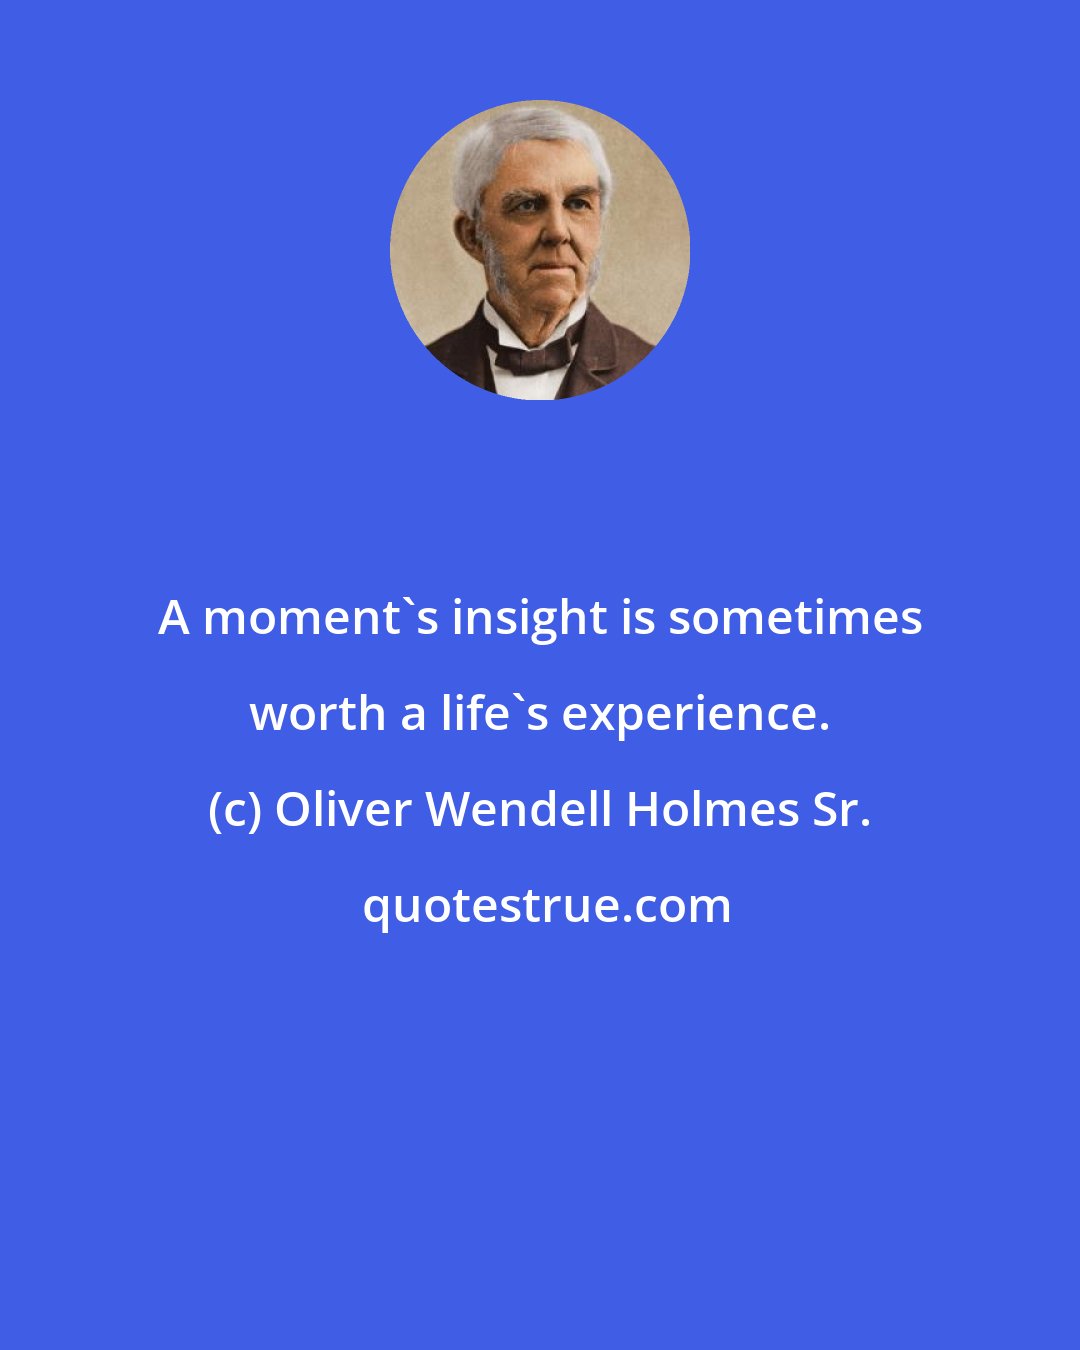 Oliver Wendell Holmes Sr.: A moment's insight is sometimes worth a life's experience.